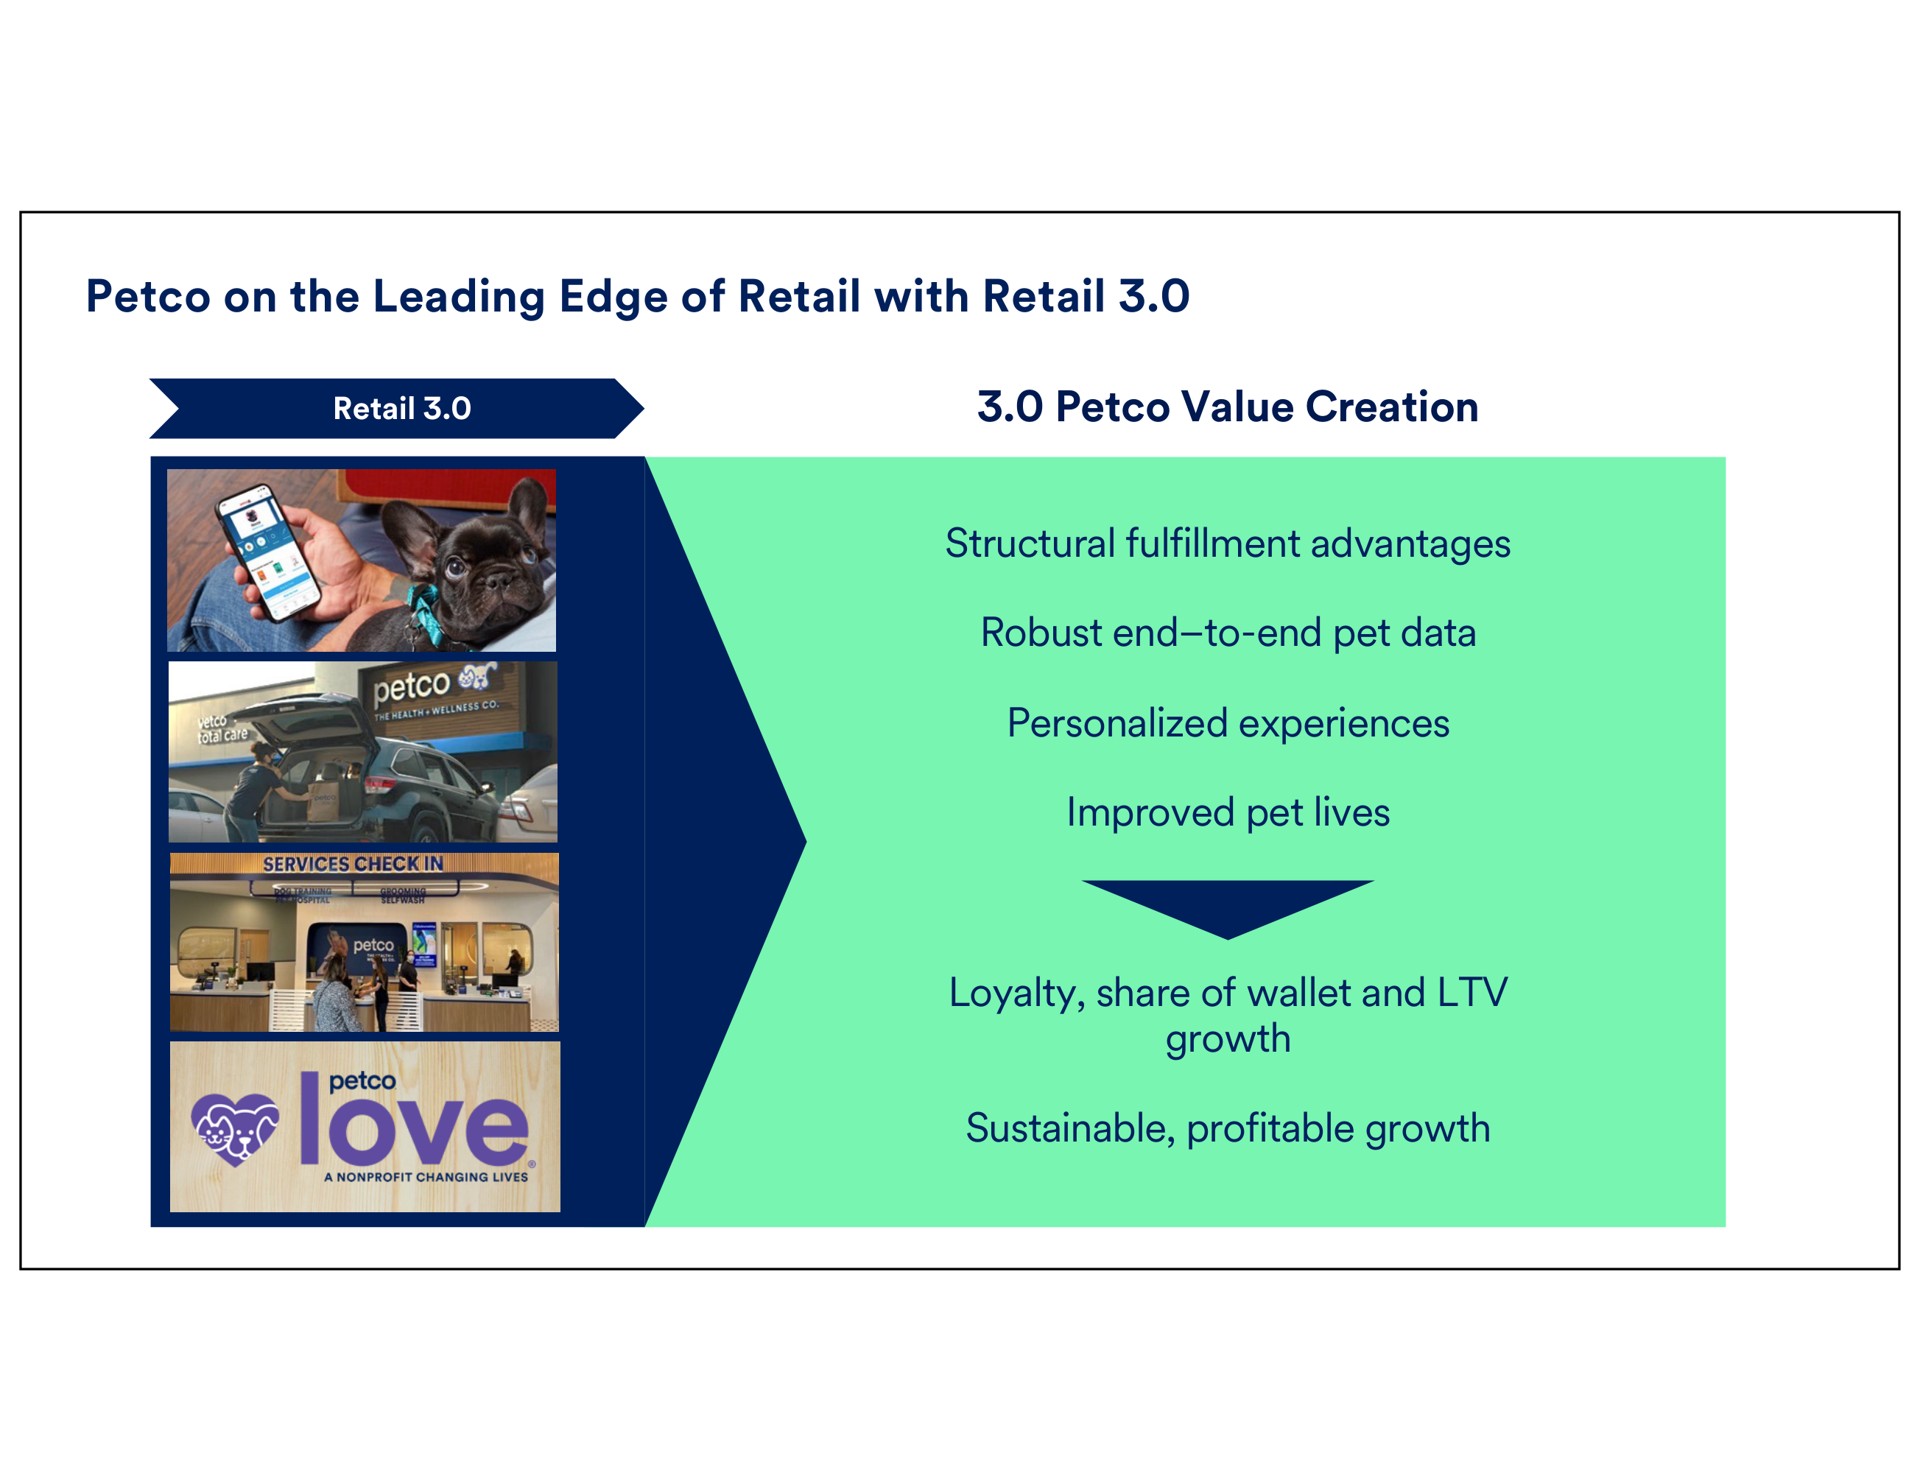 on the leading edge of retail with retail value creation structural fulfillment advantages robust end to end pet data personalized experiences improved pet lives a nonprofit changing lives loyalty share wallet and growth sustainable profitable growth | Petco